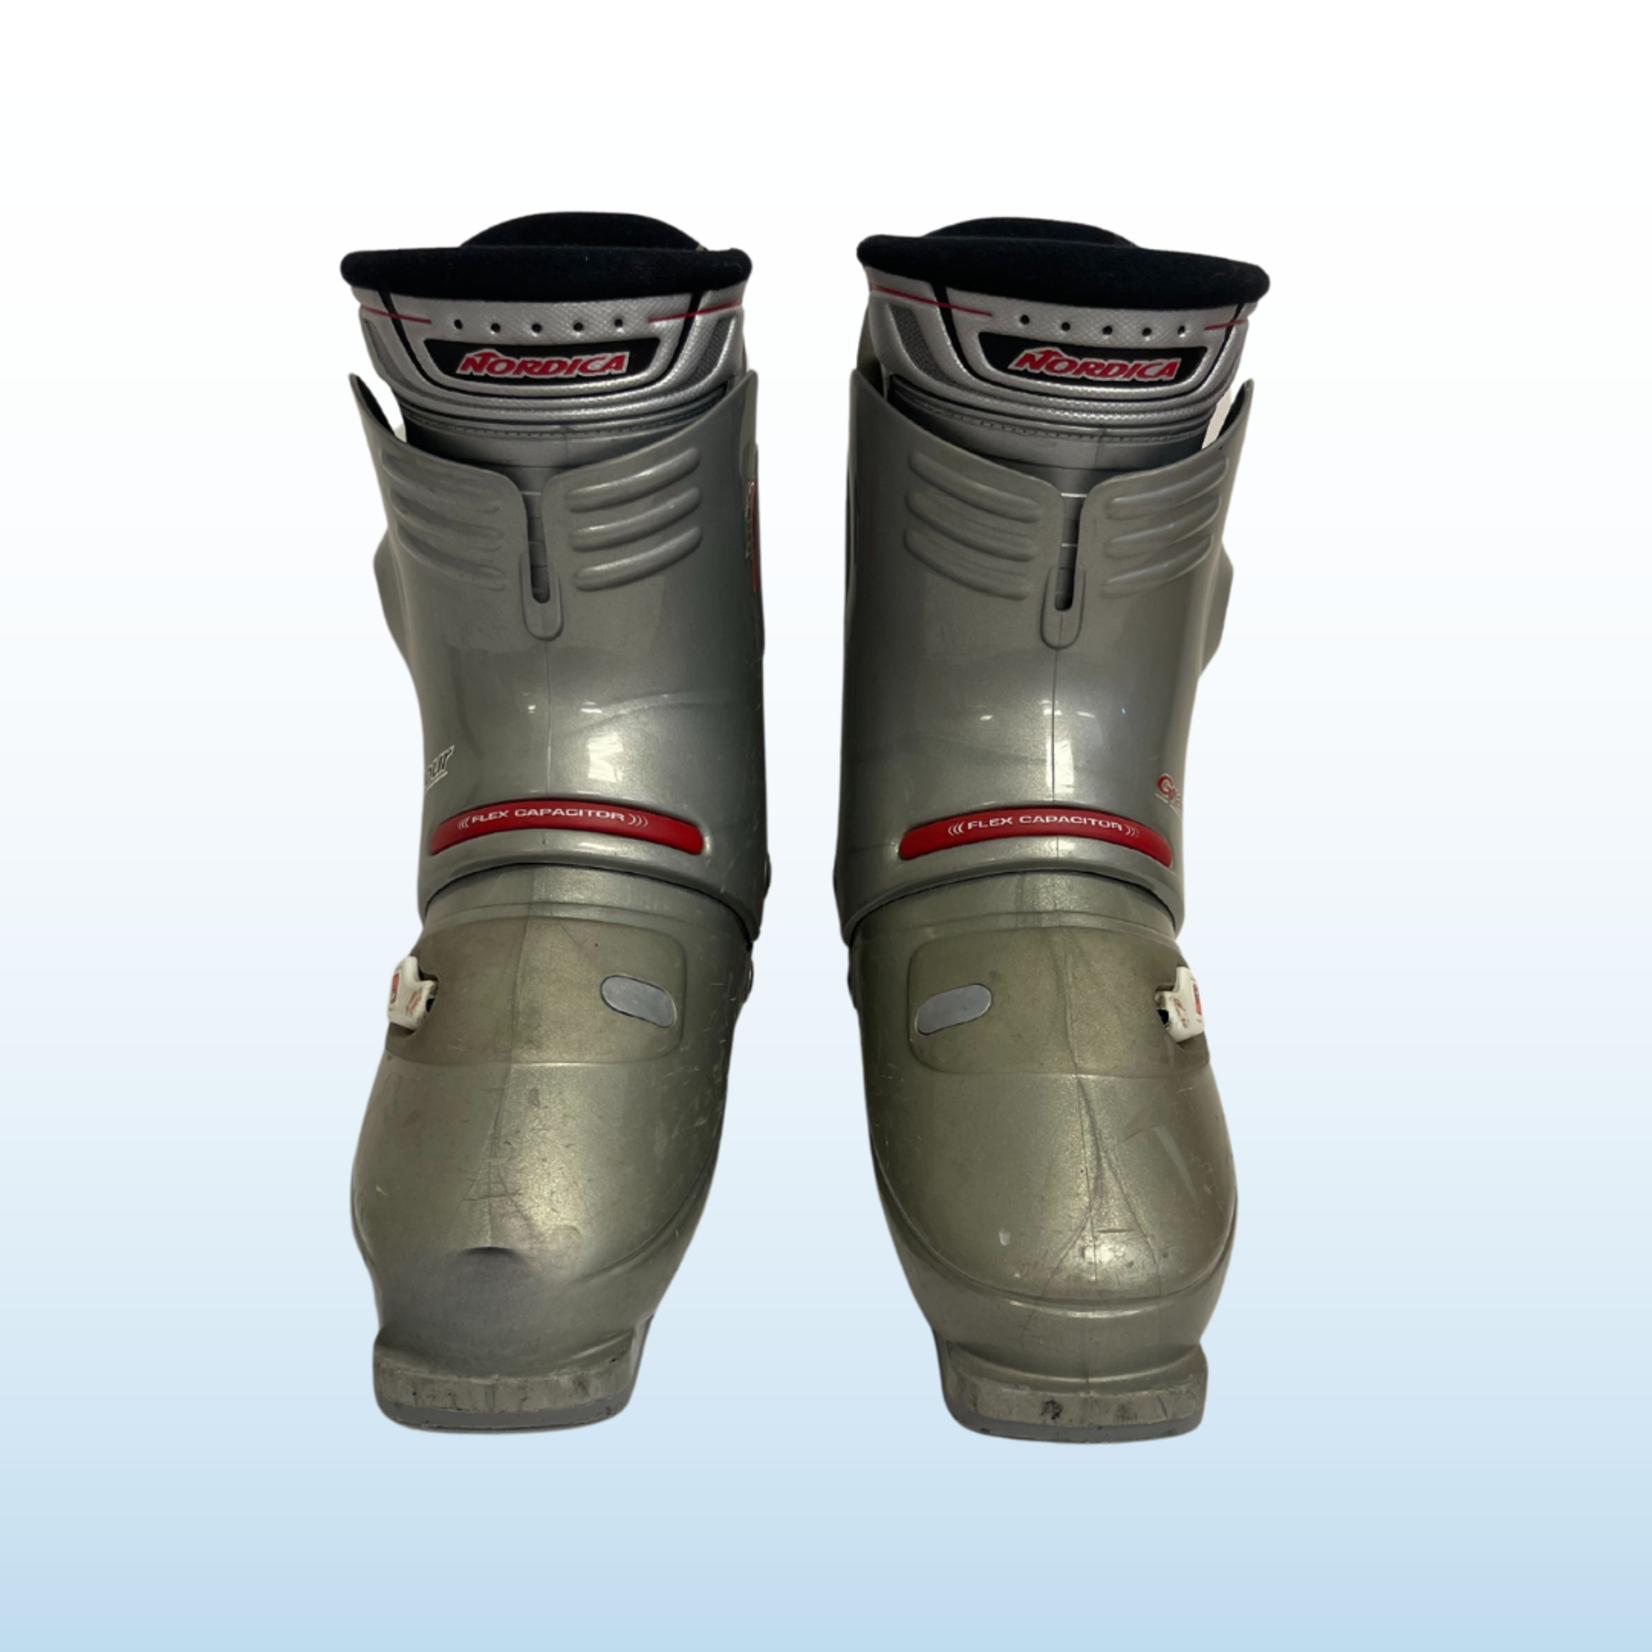 Nordica Nordica GranTour Rear Entry Ski Boots, Size 27 SOLD AS IS NO REFUNDS OR EXCHANGES